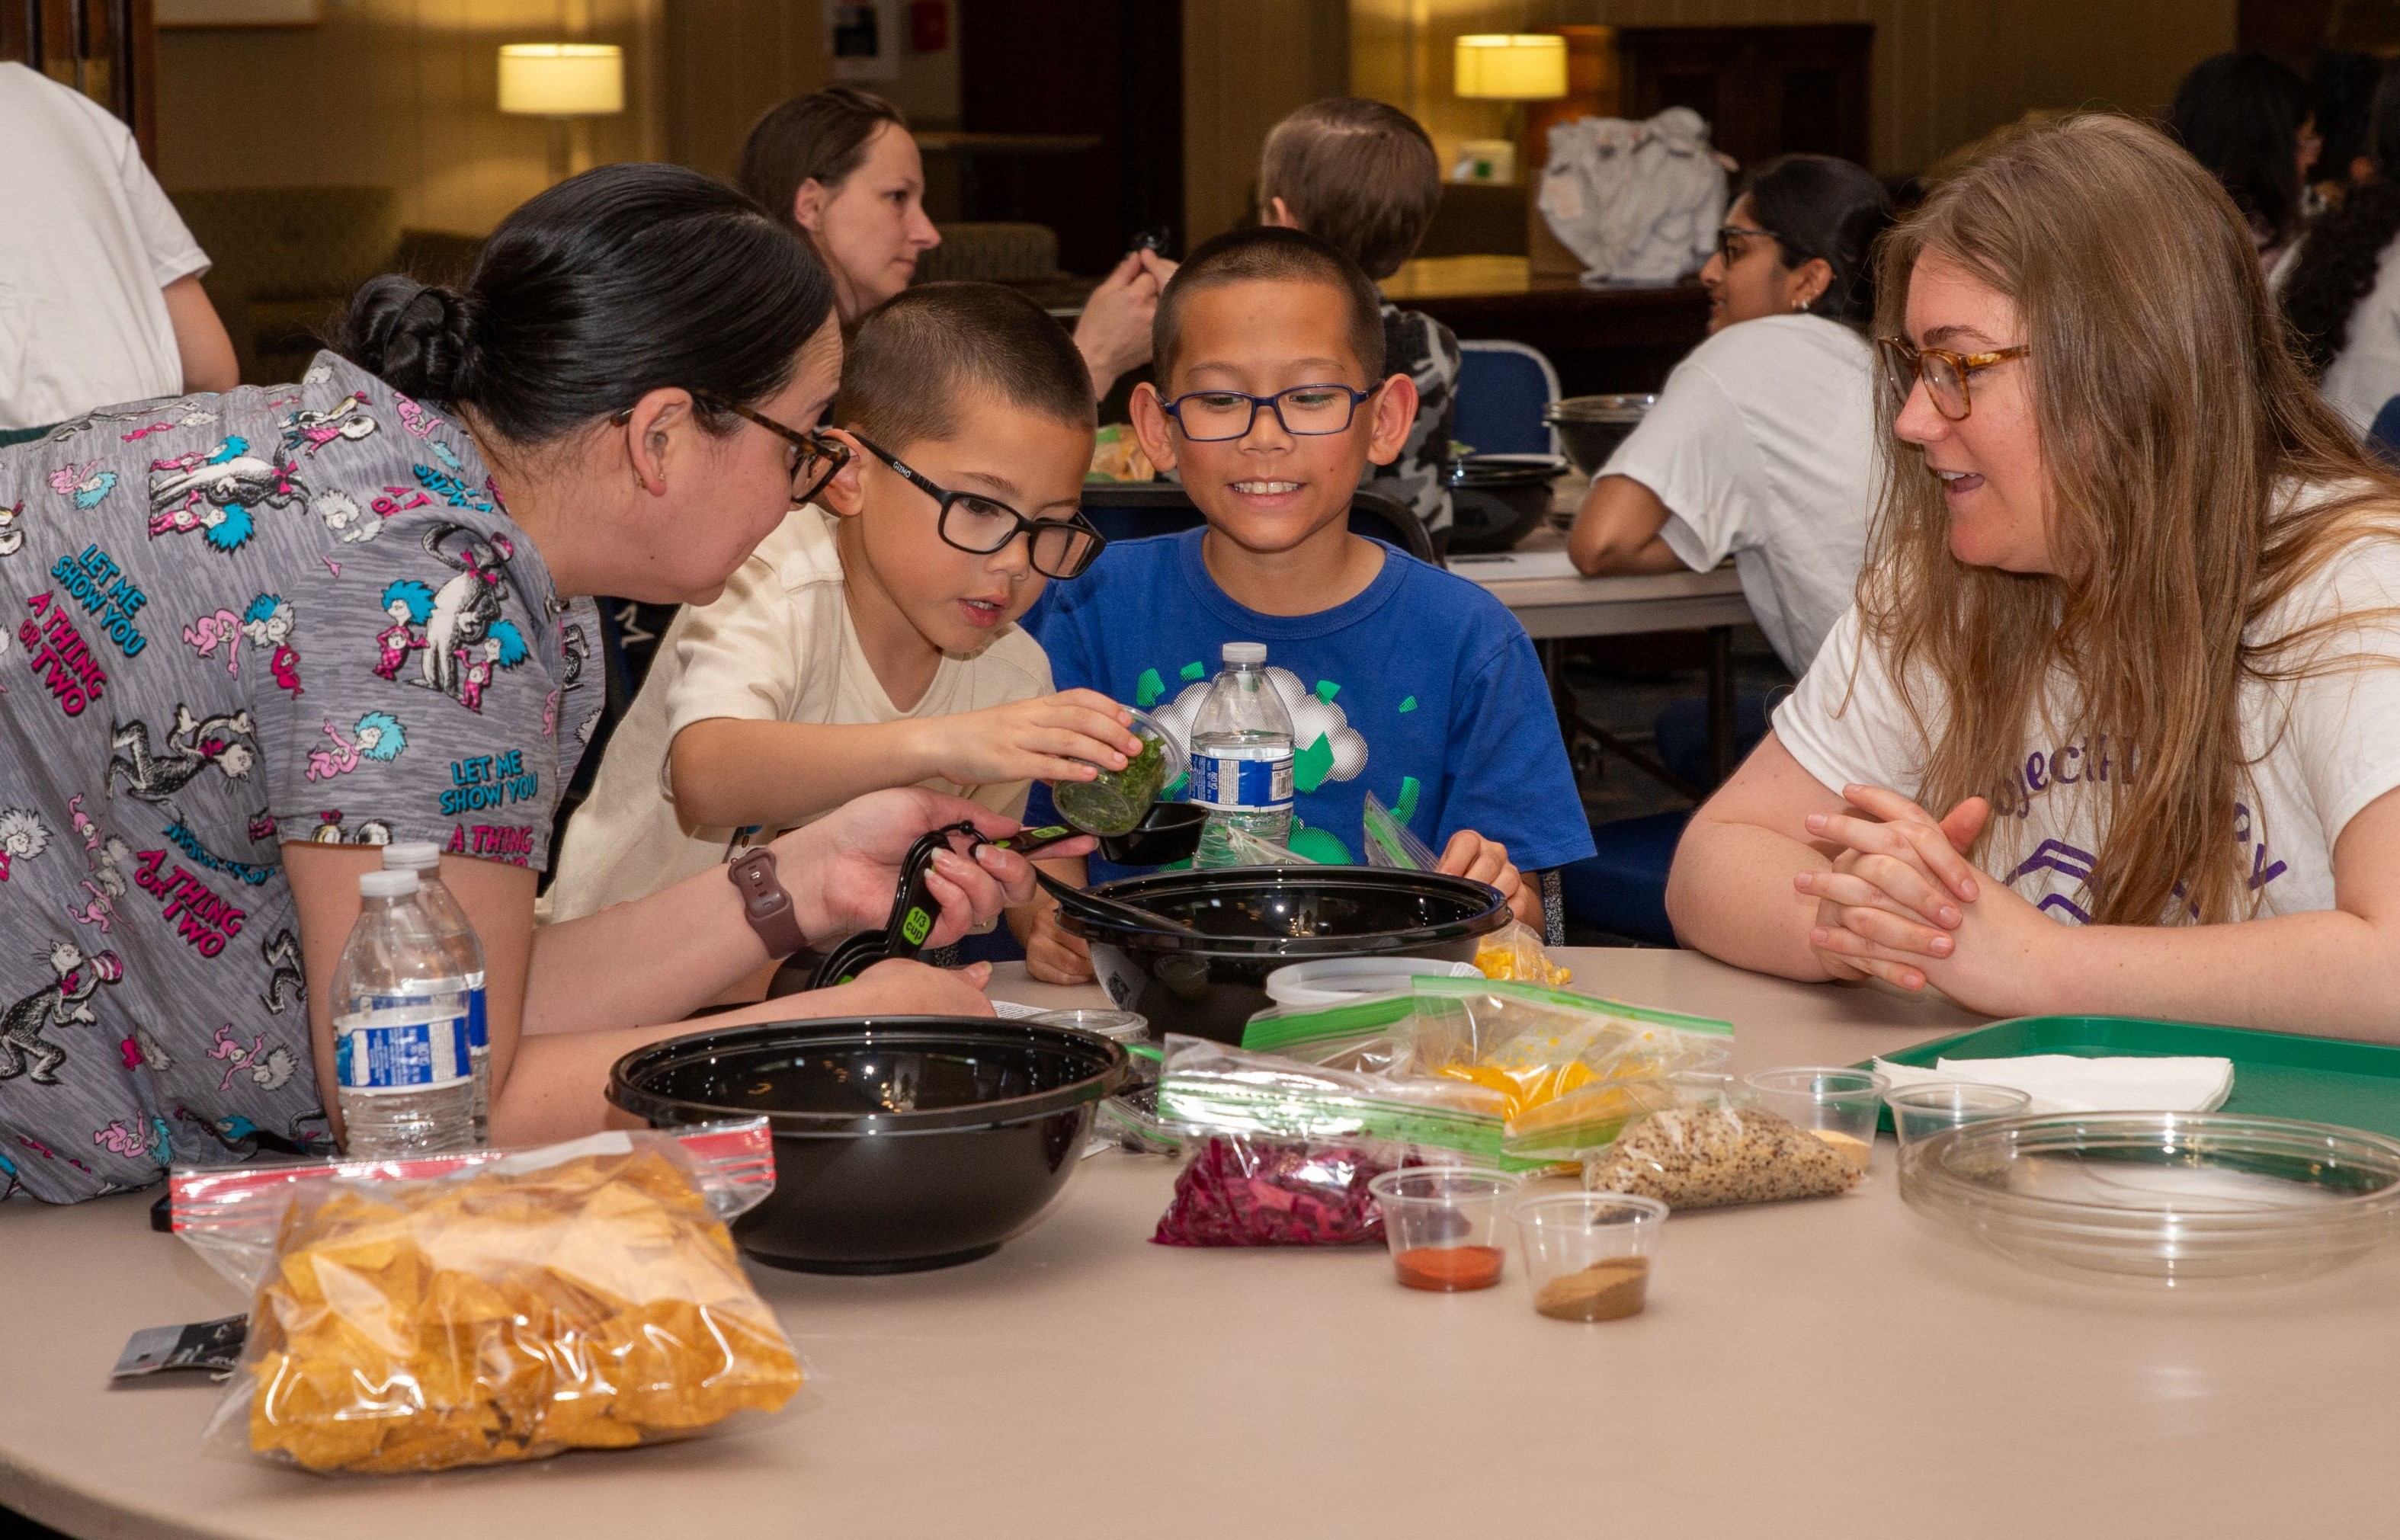 Stacy Tolman-Cordero watches as her children Brayden and Mason make a healthy snack while student doctor Kimberly Glass guides them